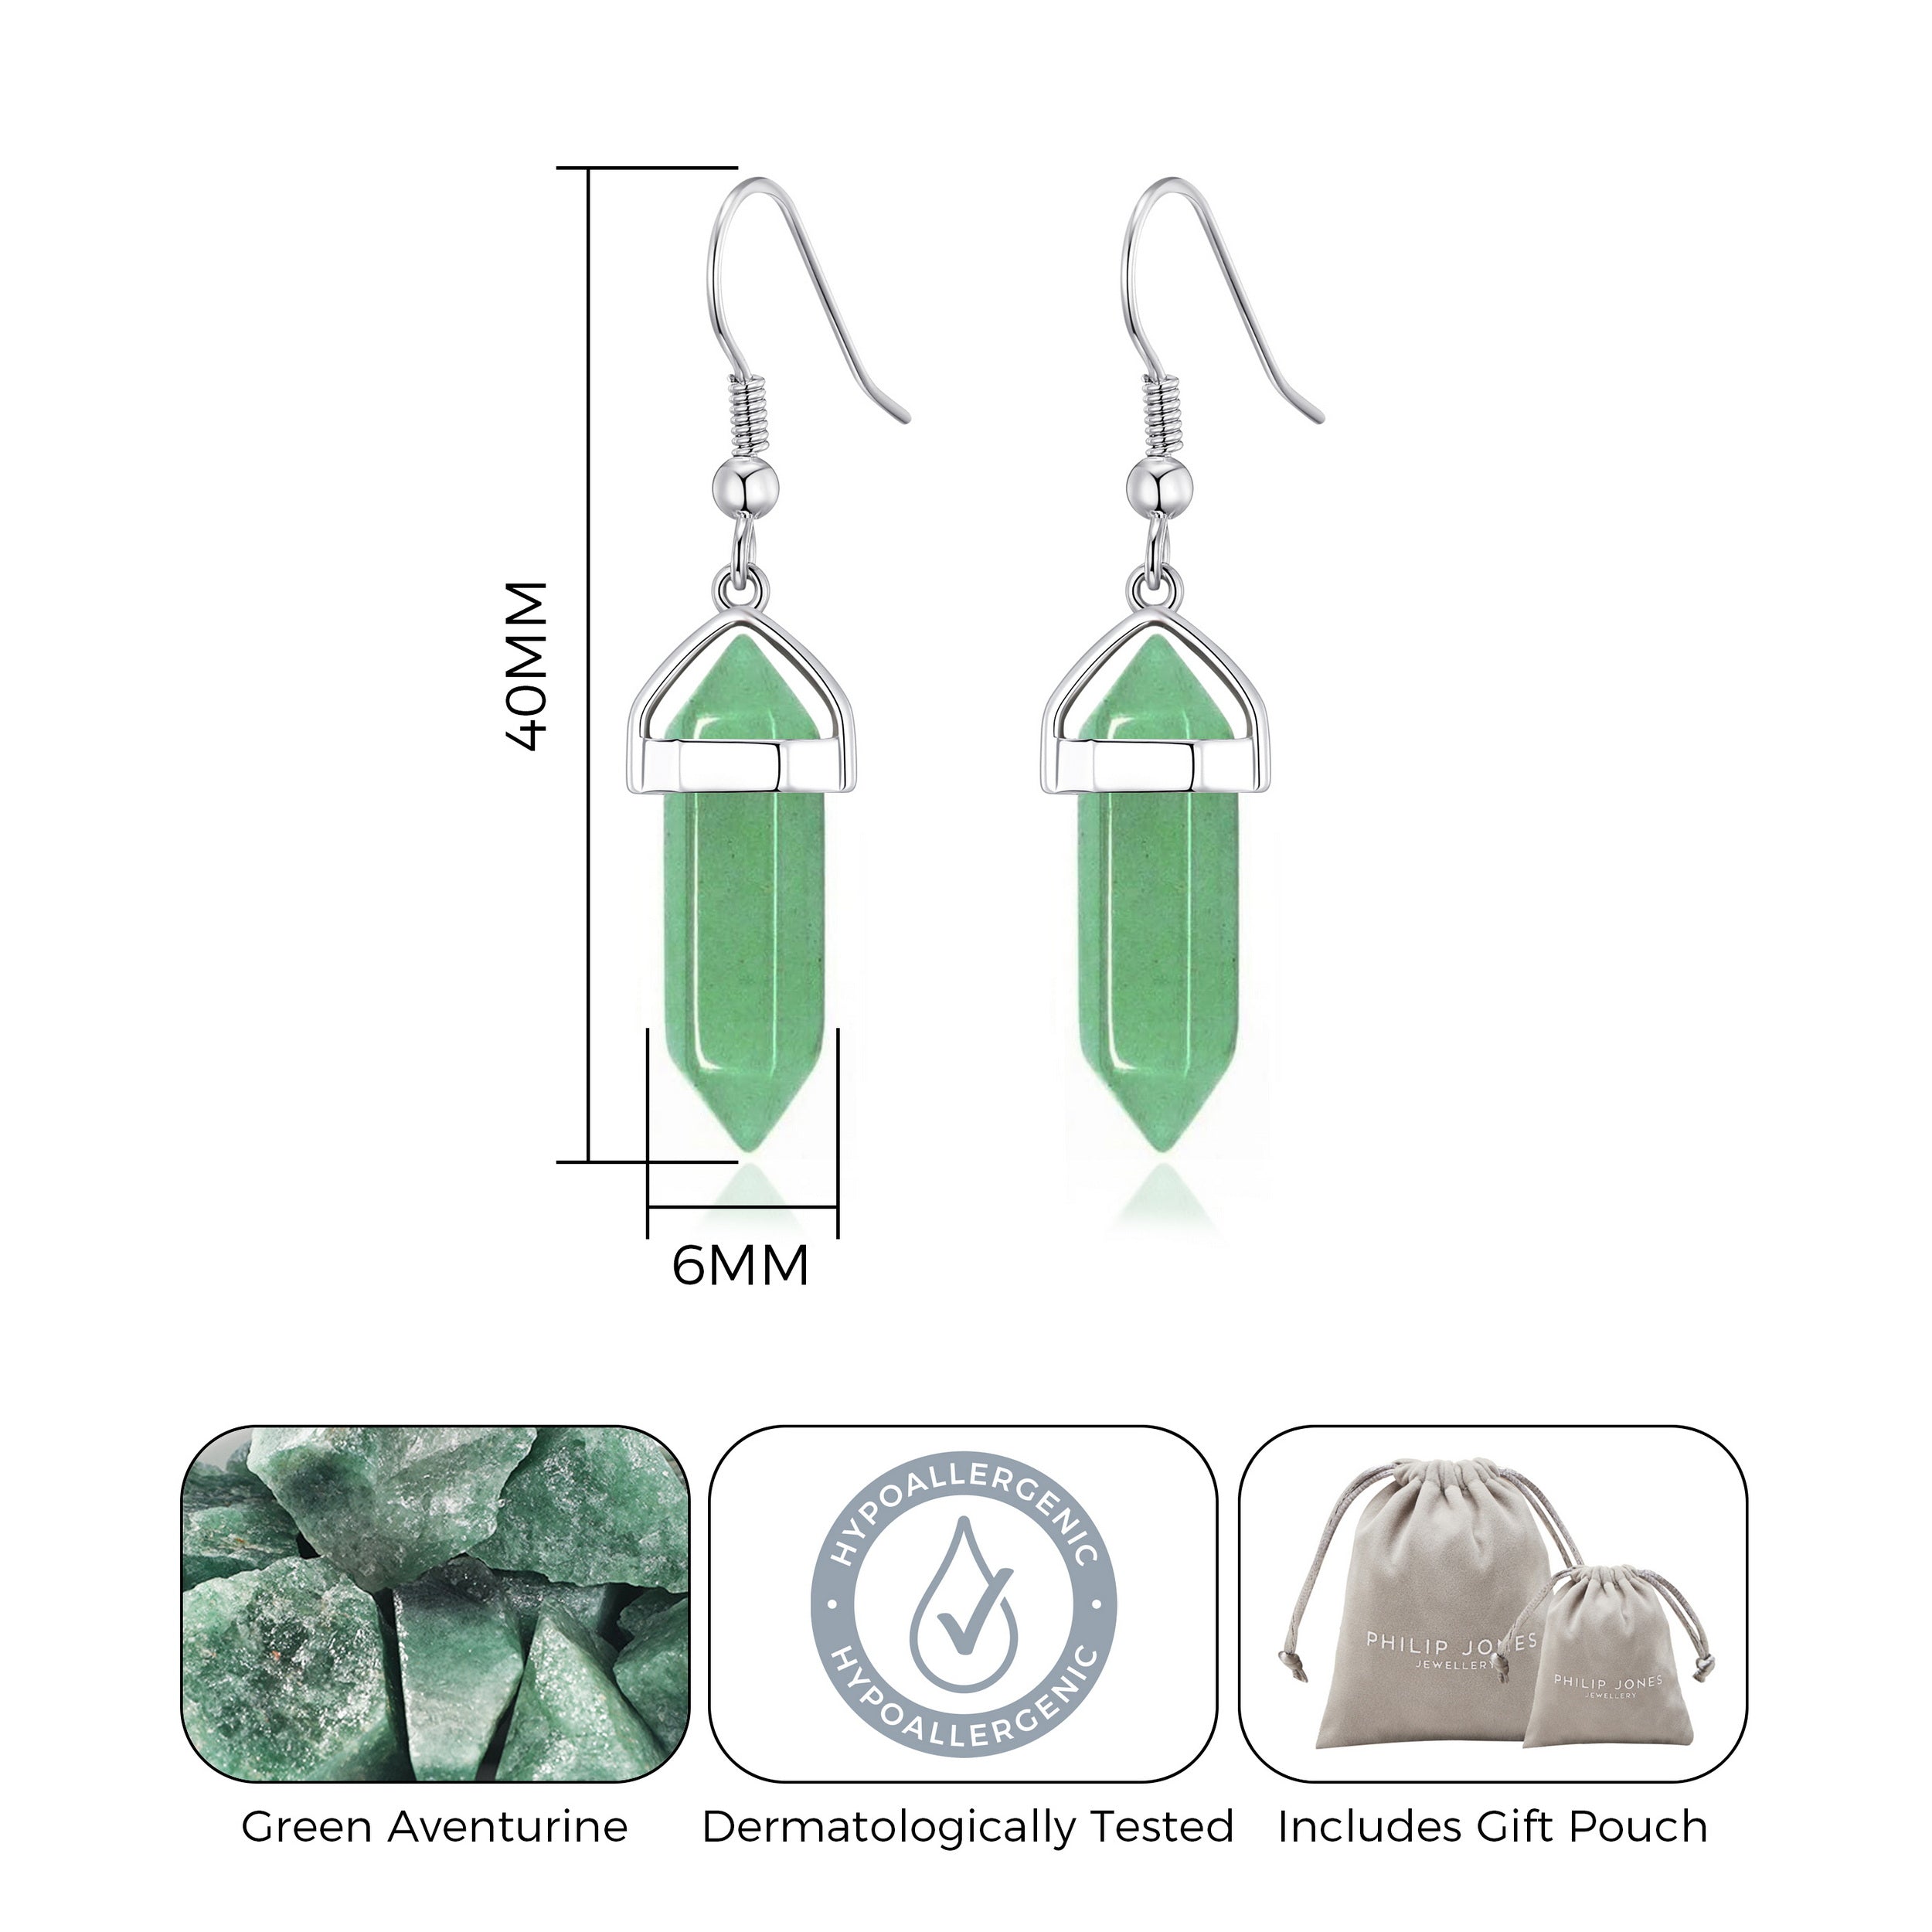 Green Aventurine Gemstone Drop Earrings with Quote Card